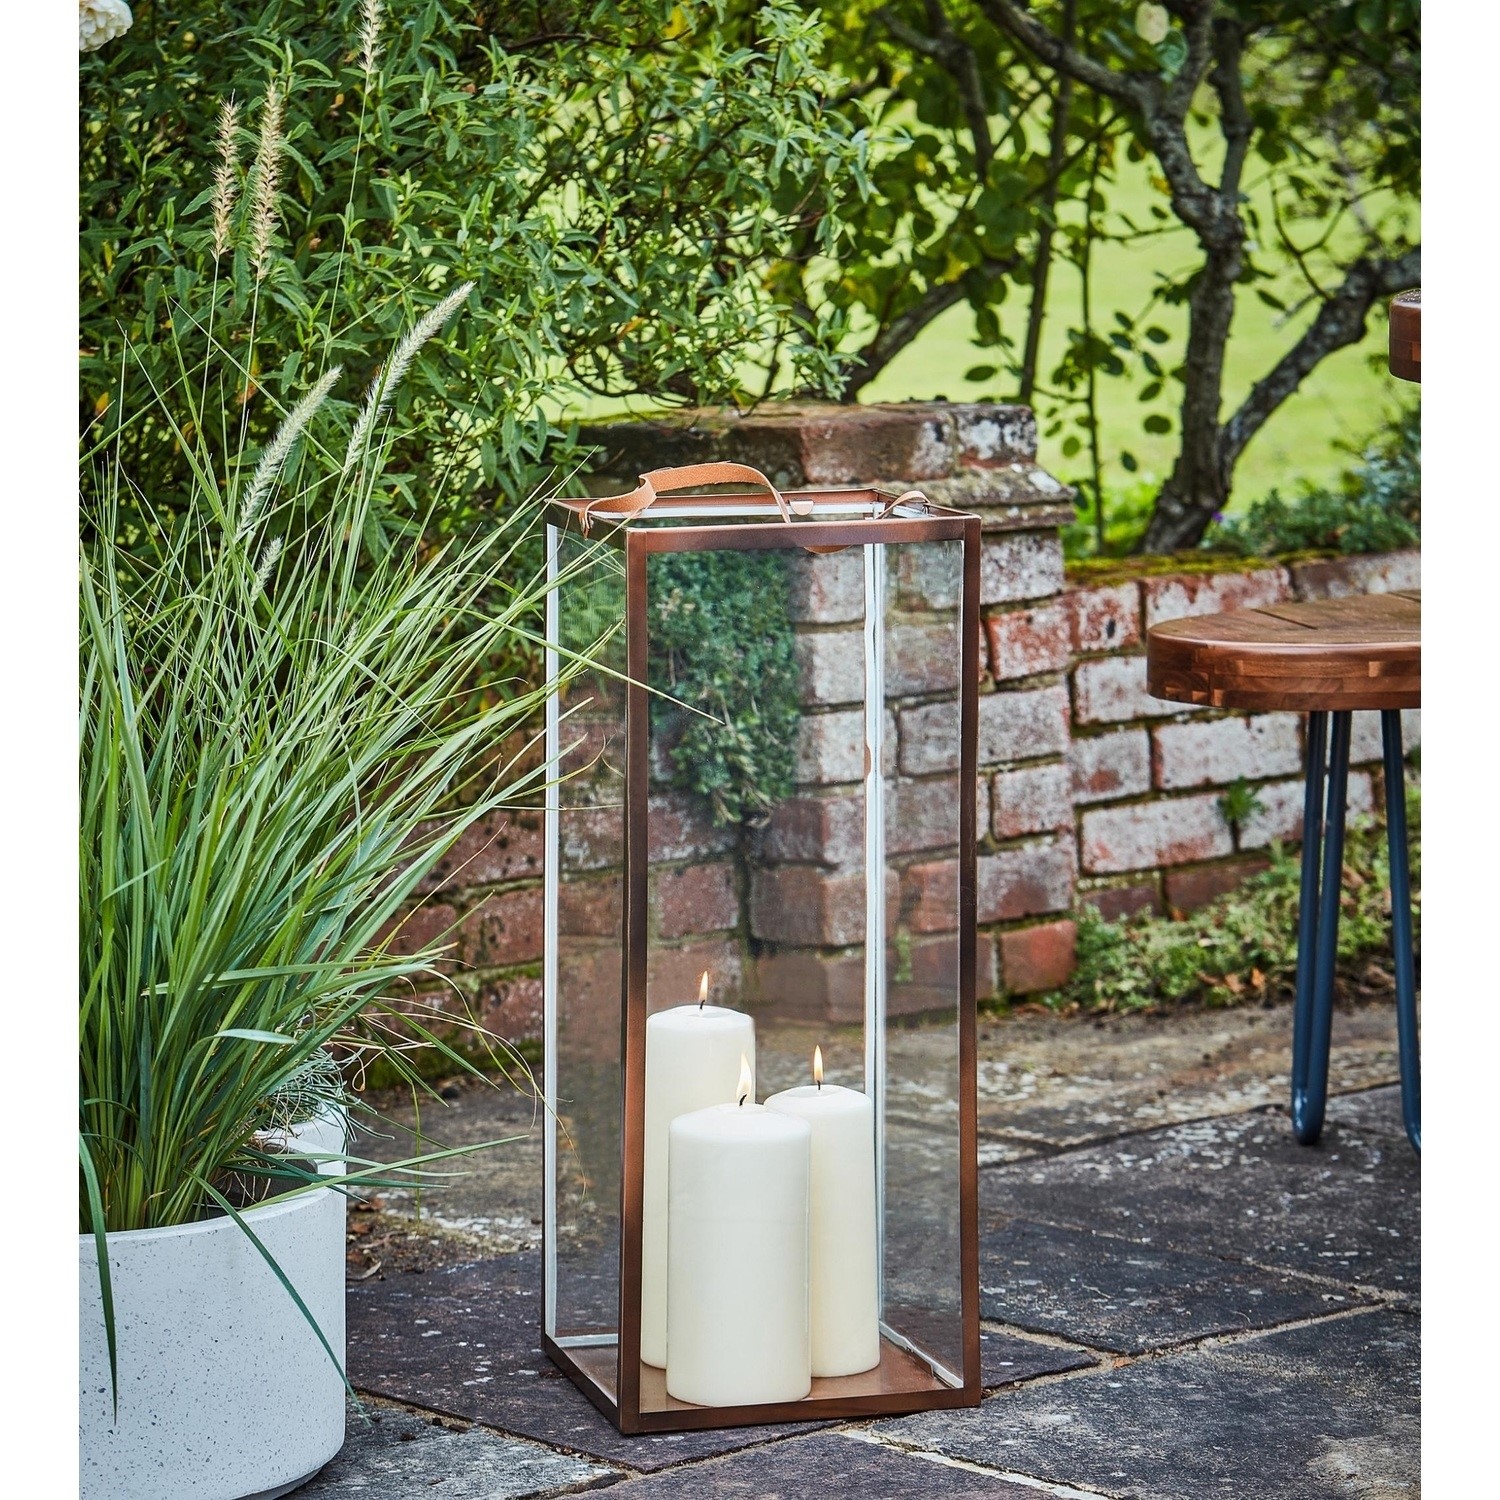 Read more about Ivyline large tall copper outdoor lantern hampton